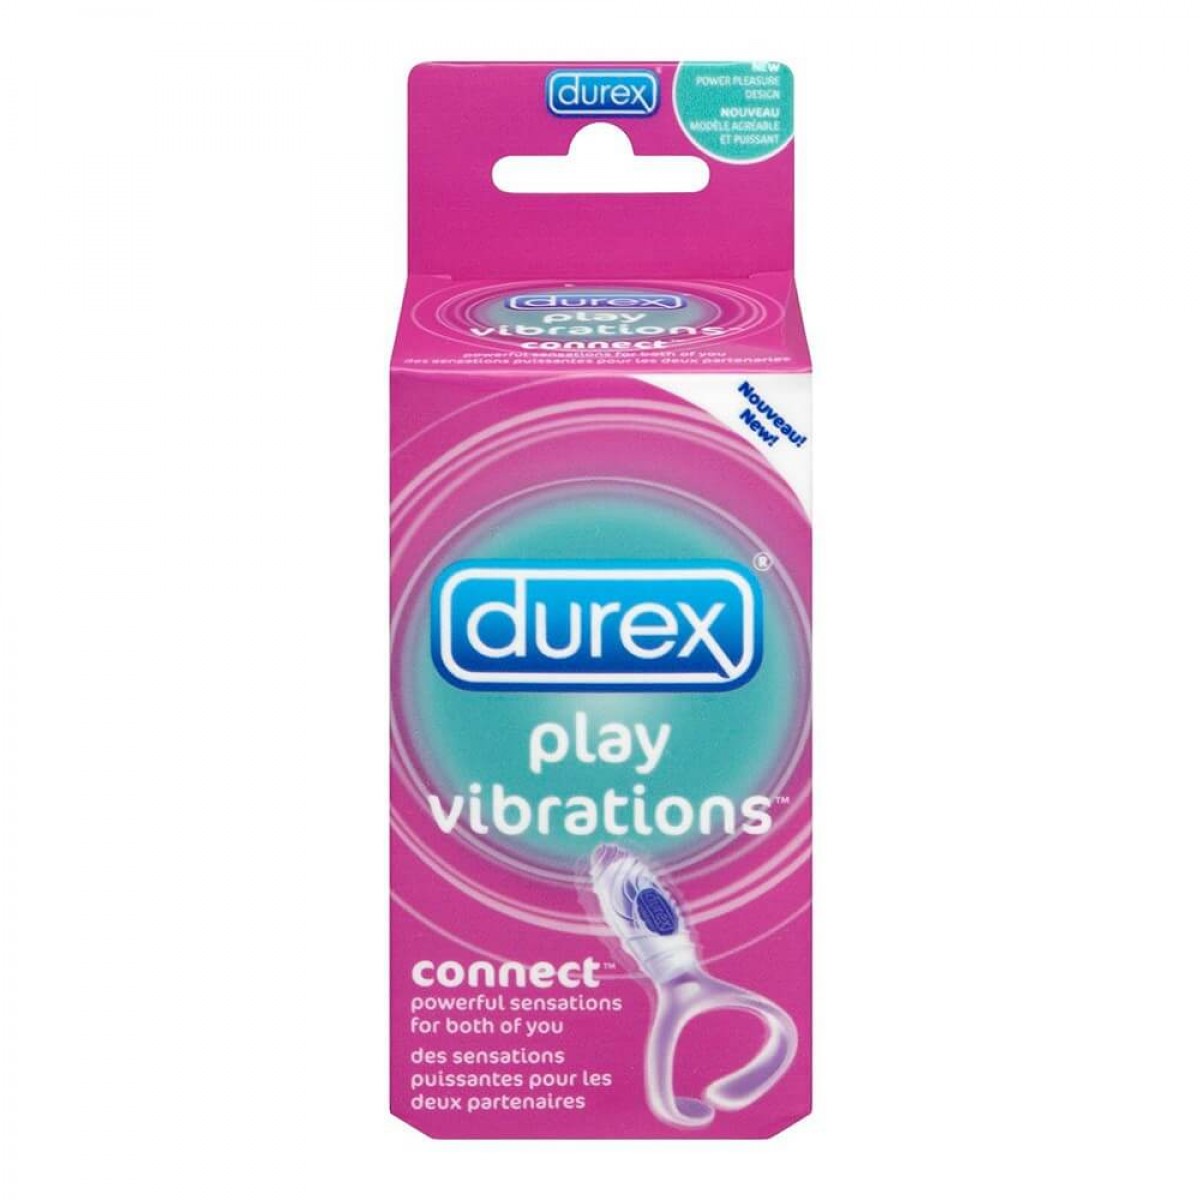 Sex Toys 1hr Delivery Durex Connect Ring And Condom Adult Store Open Late